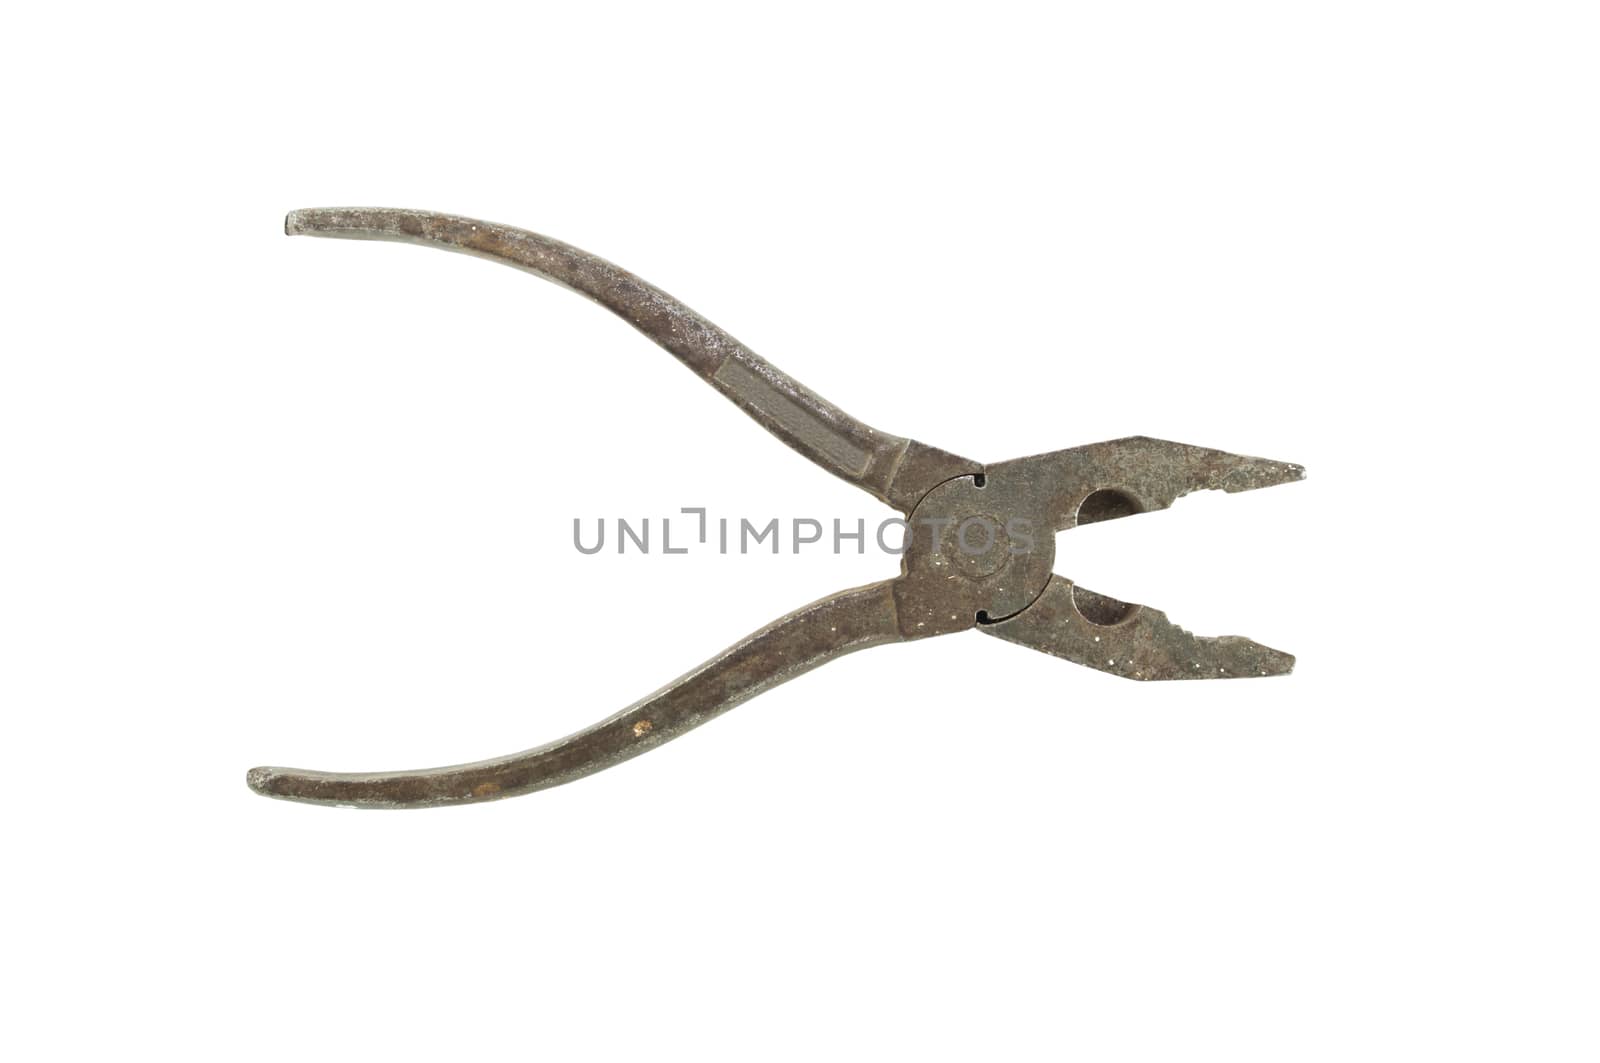 old combined pliers isolated on a white background